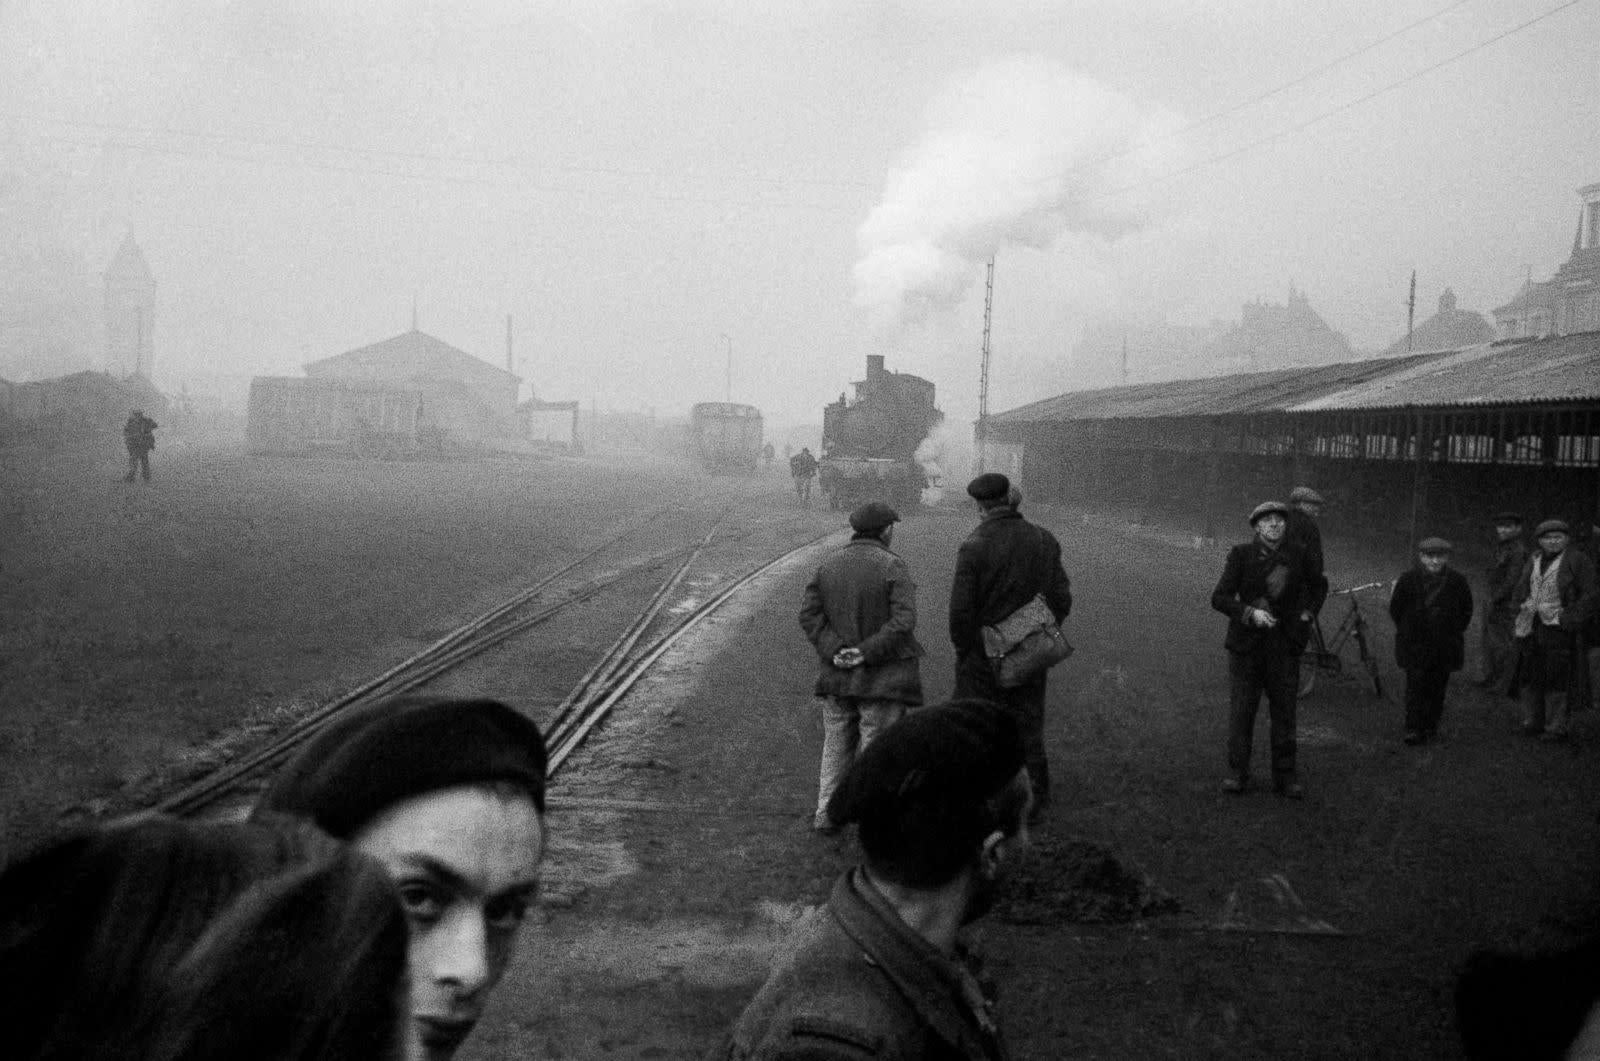 Werner Bischof Black and White Photograph - Unemployed People Look for Jobs at the Railroad Station, City of Rouen, France